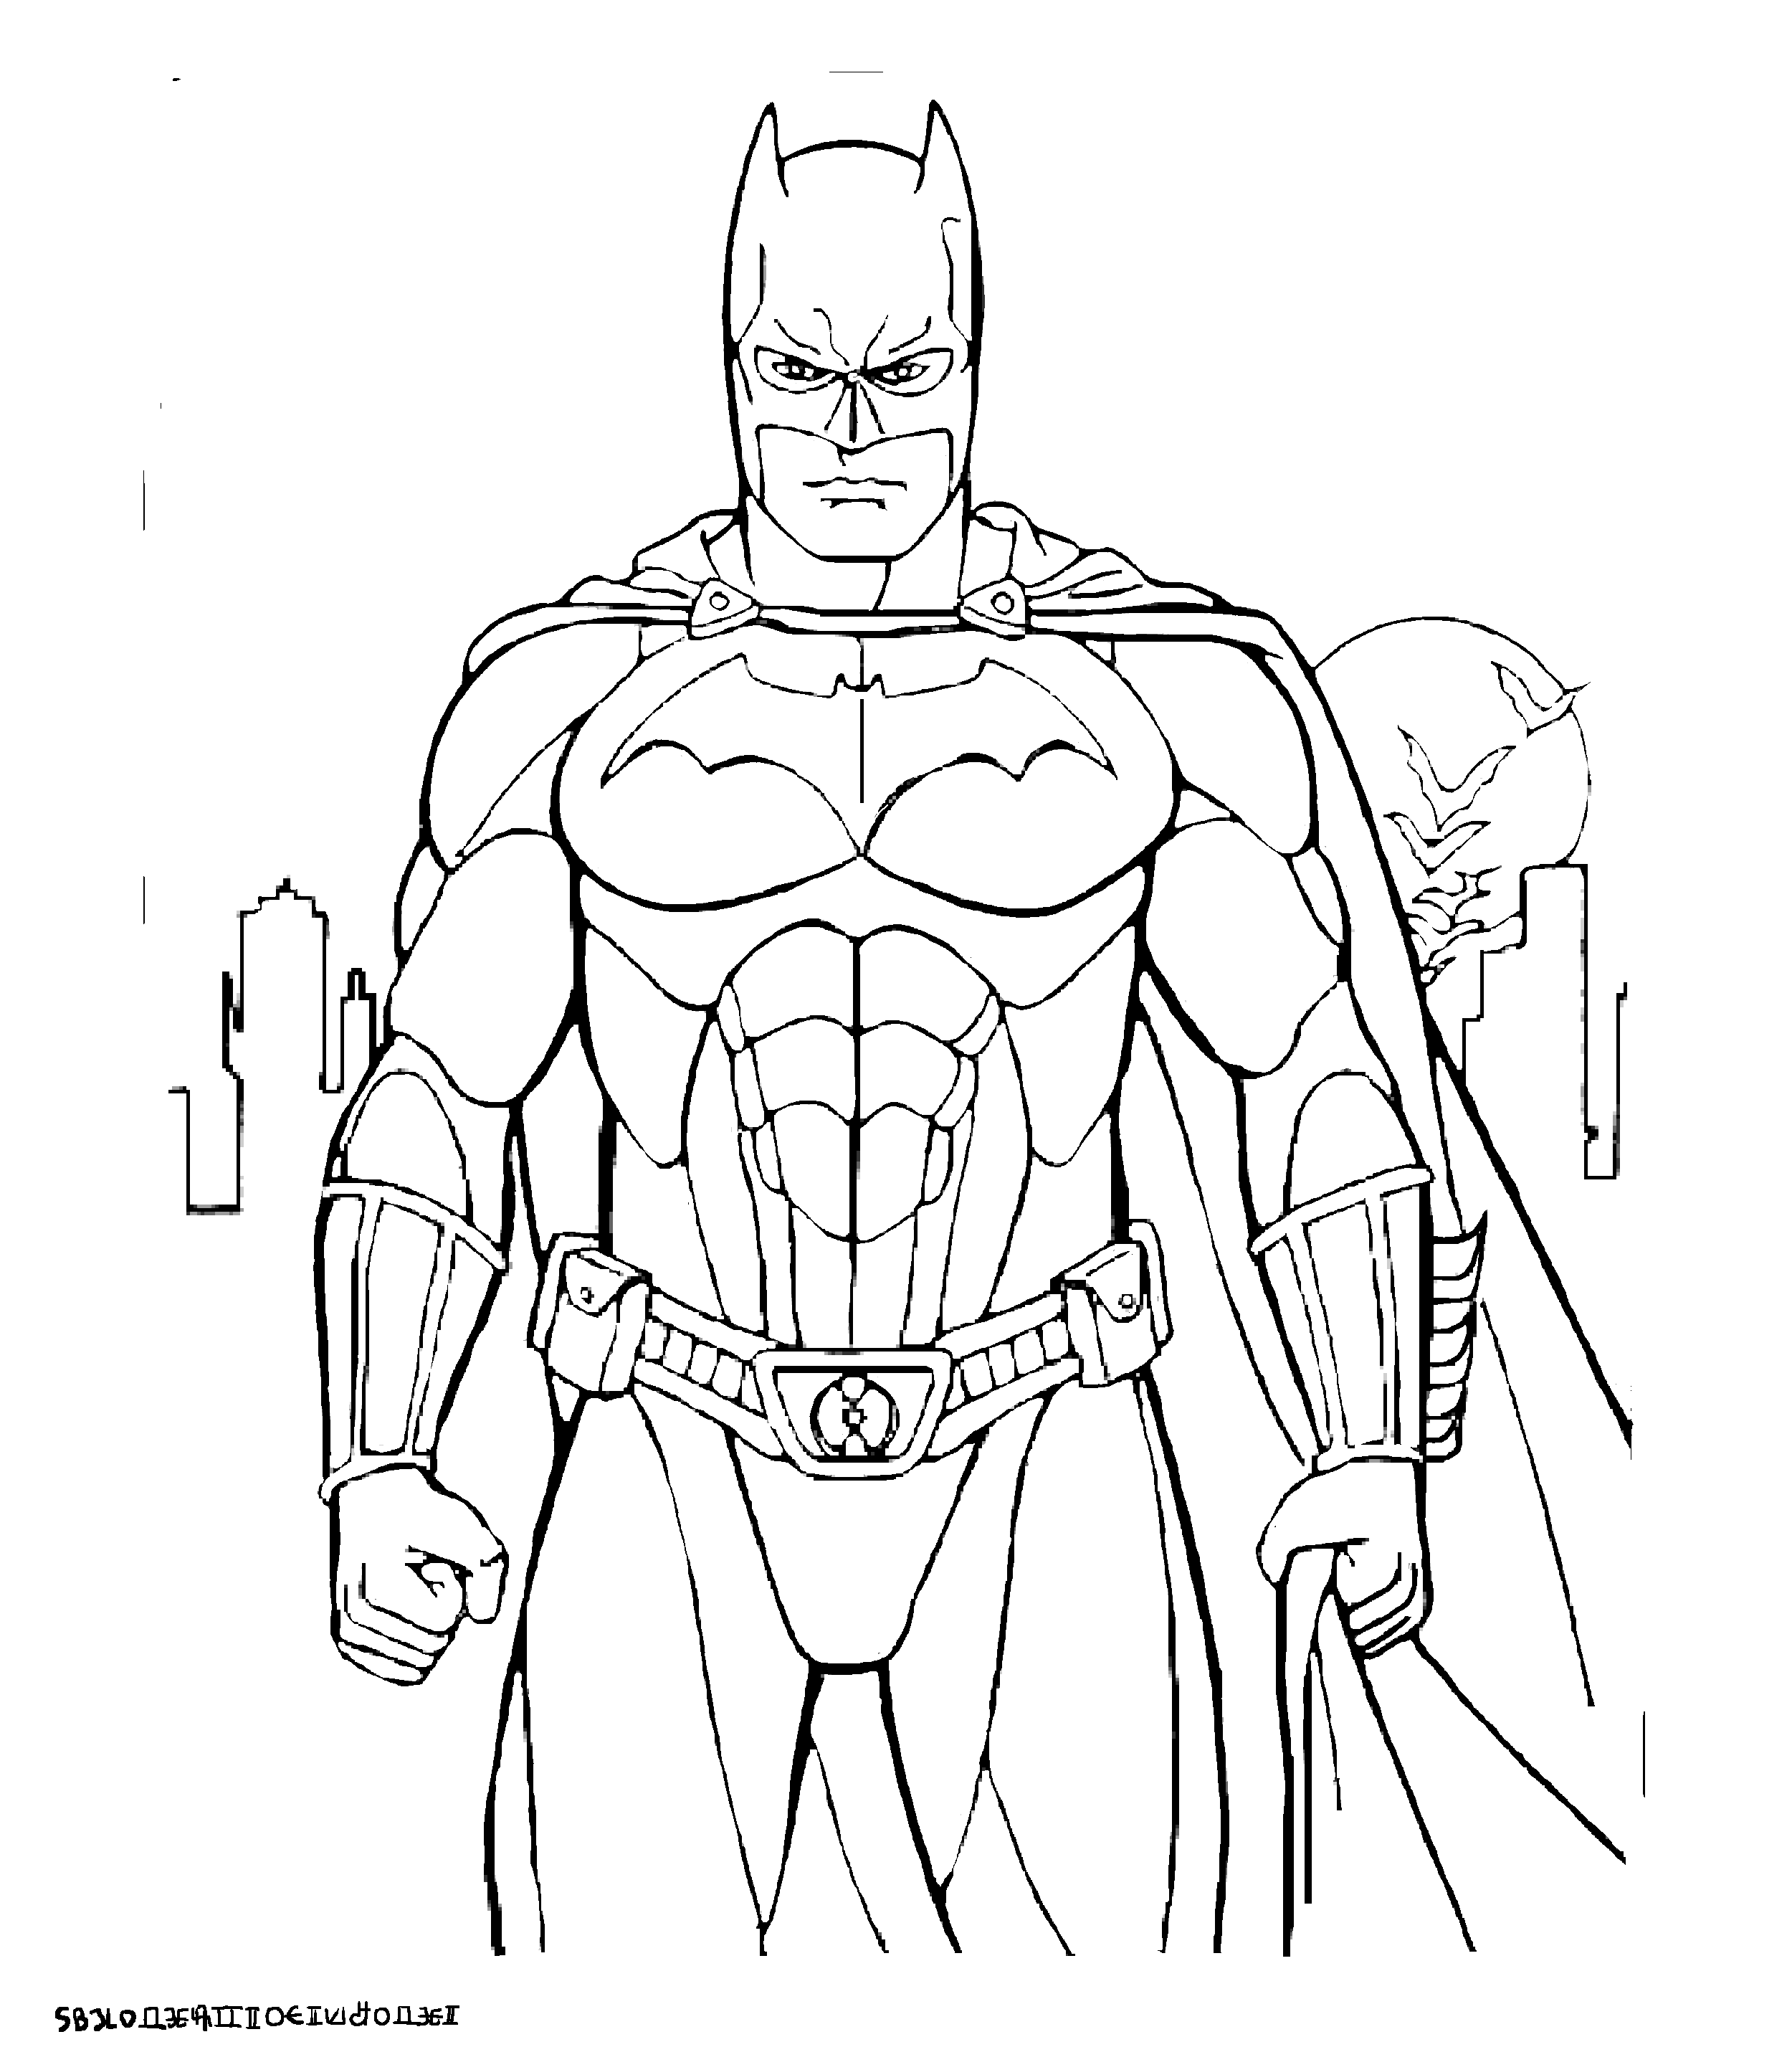 Standing Batman Coloring Page for Kids - Free Batman Printable Coloring  Pages Online for Kids - ColoringPages101.com | Coloring Pages for Kids